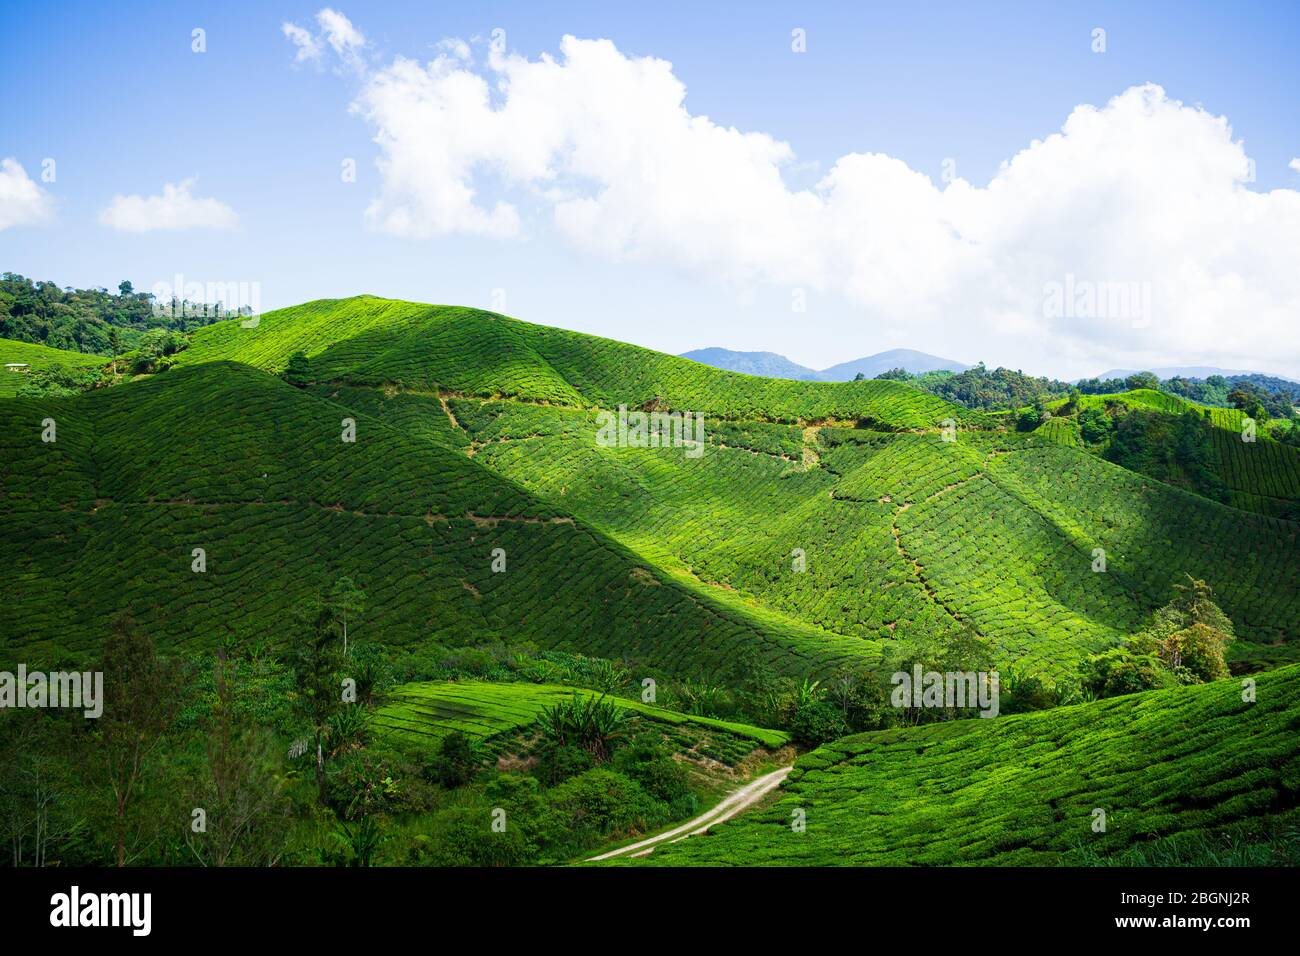 The Boh Tea Company was founded in 1929 and is one of the famous tea brands in Malaysia. One of the highlights scenic spot in Cameron Highlands. Stock Photo